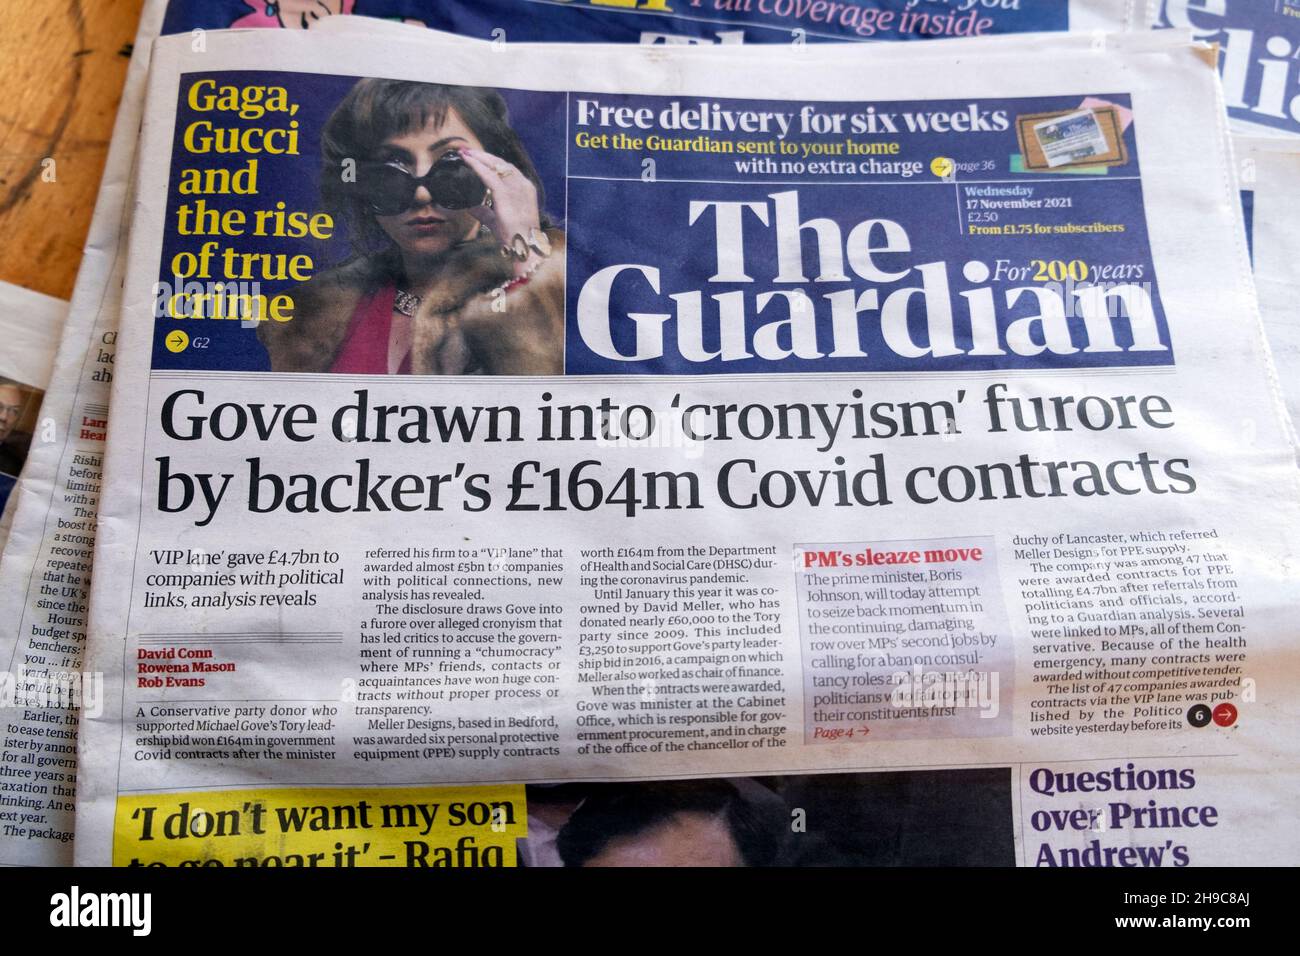 Michael 'Gove drawn into 'cronyism furore by backer's £164m Covid contracts' Guardian newspaper front page headline on 17 November 2021 in London UK Stock Photo